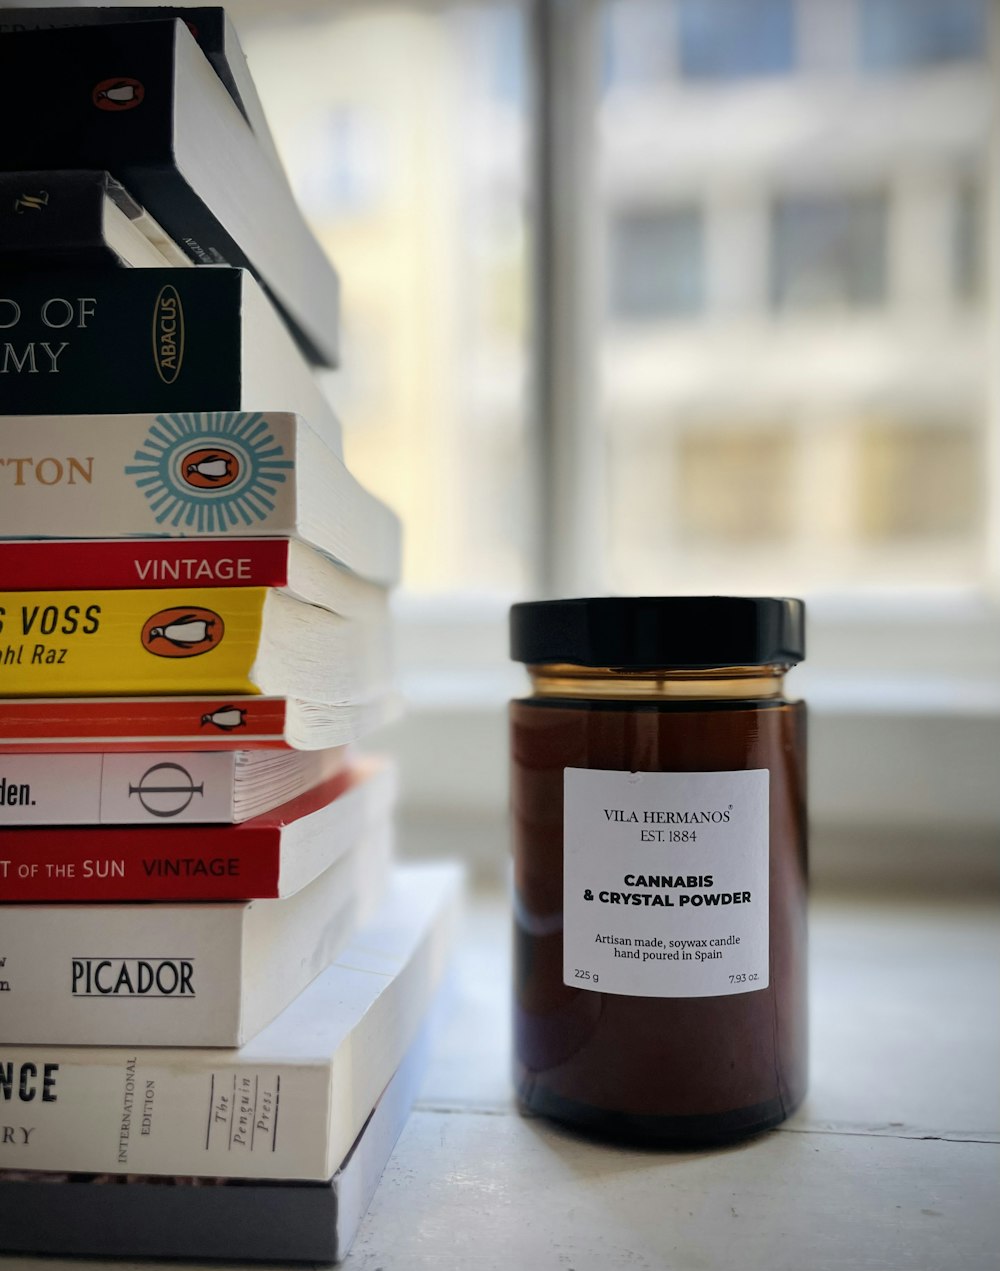 a stack of books sitting next to a jar of jam